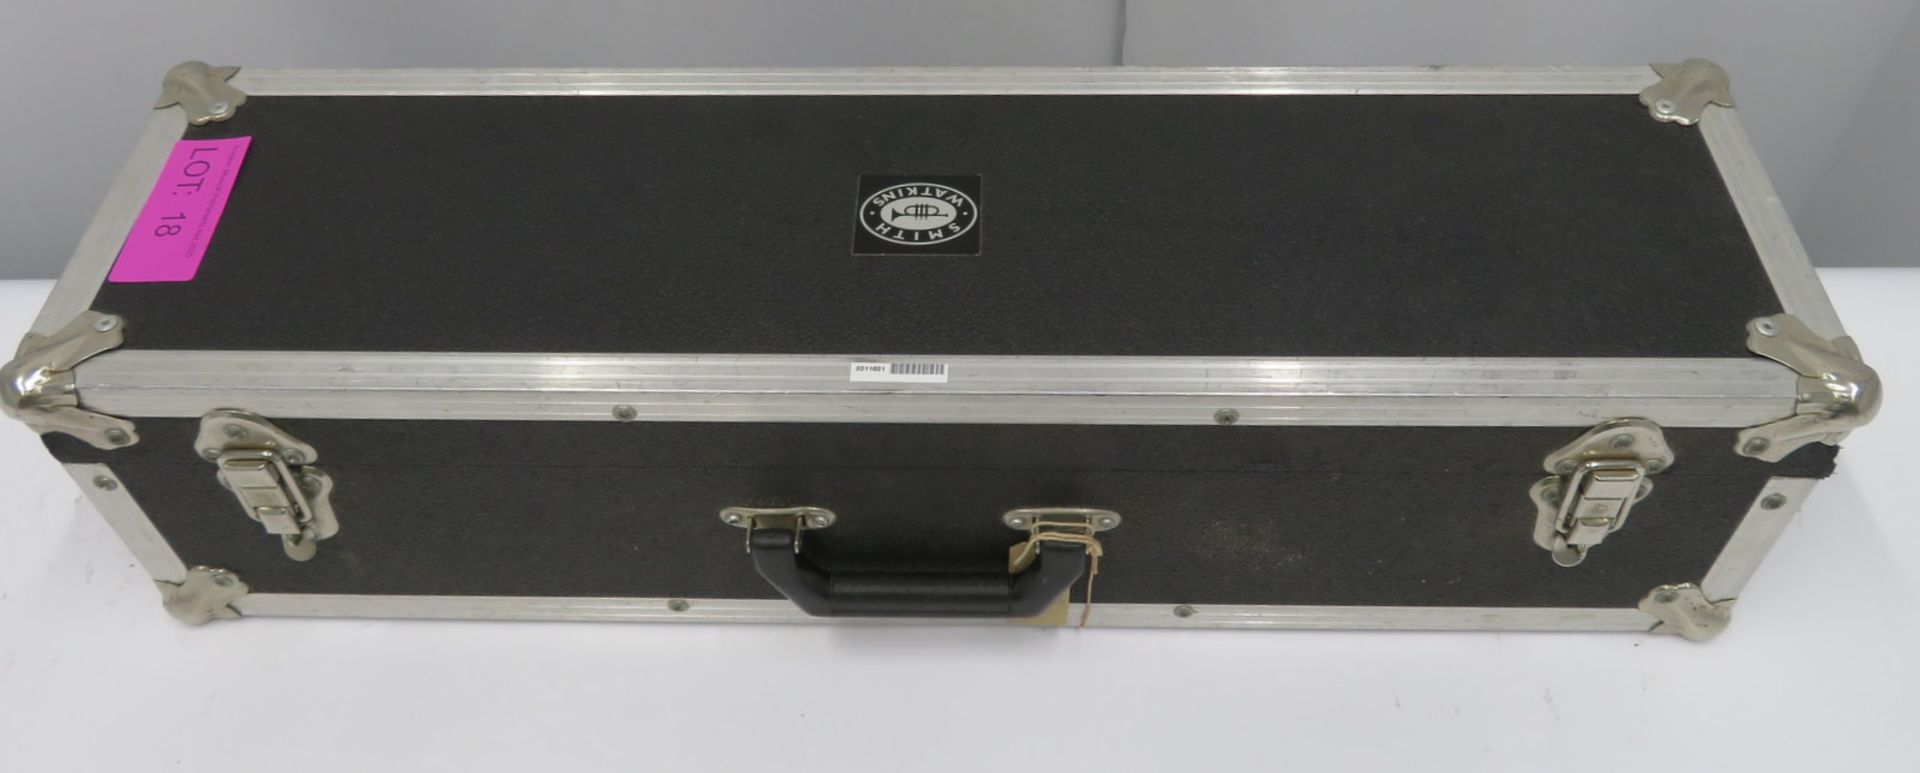 Smith-Watkins fanfare trumpet with case. Serial number: 766. - Image 14 of 14